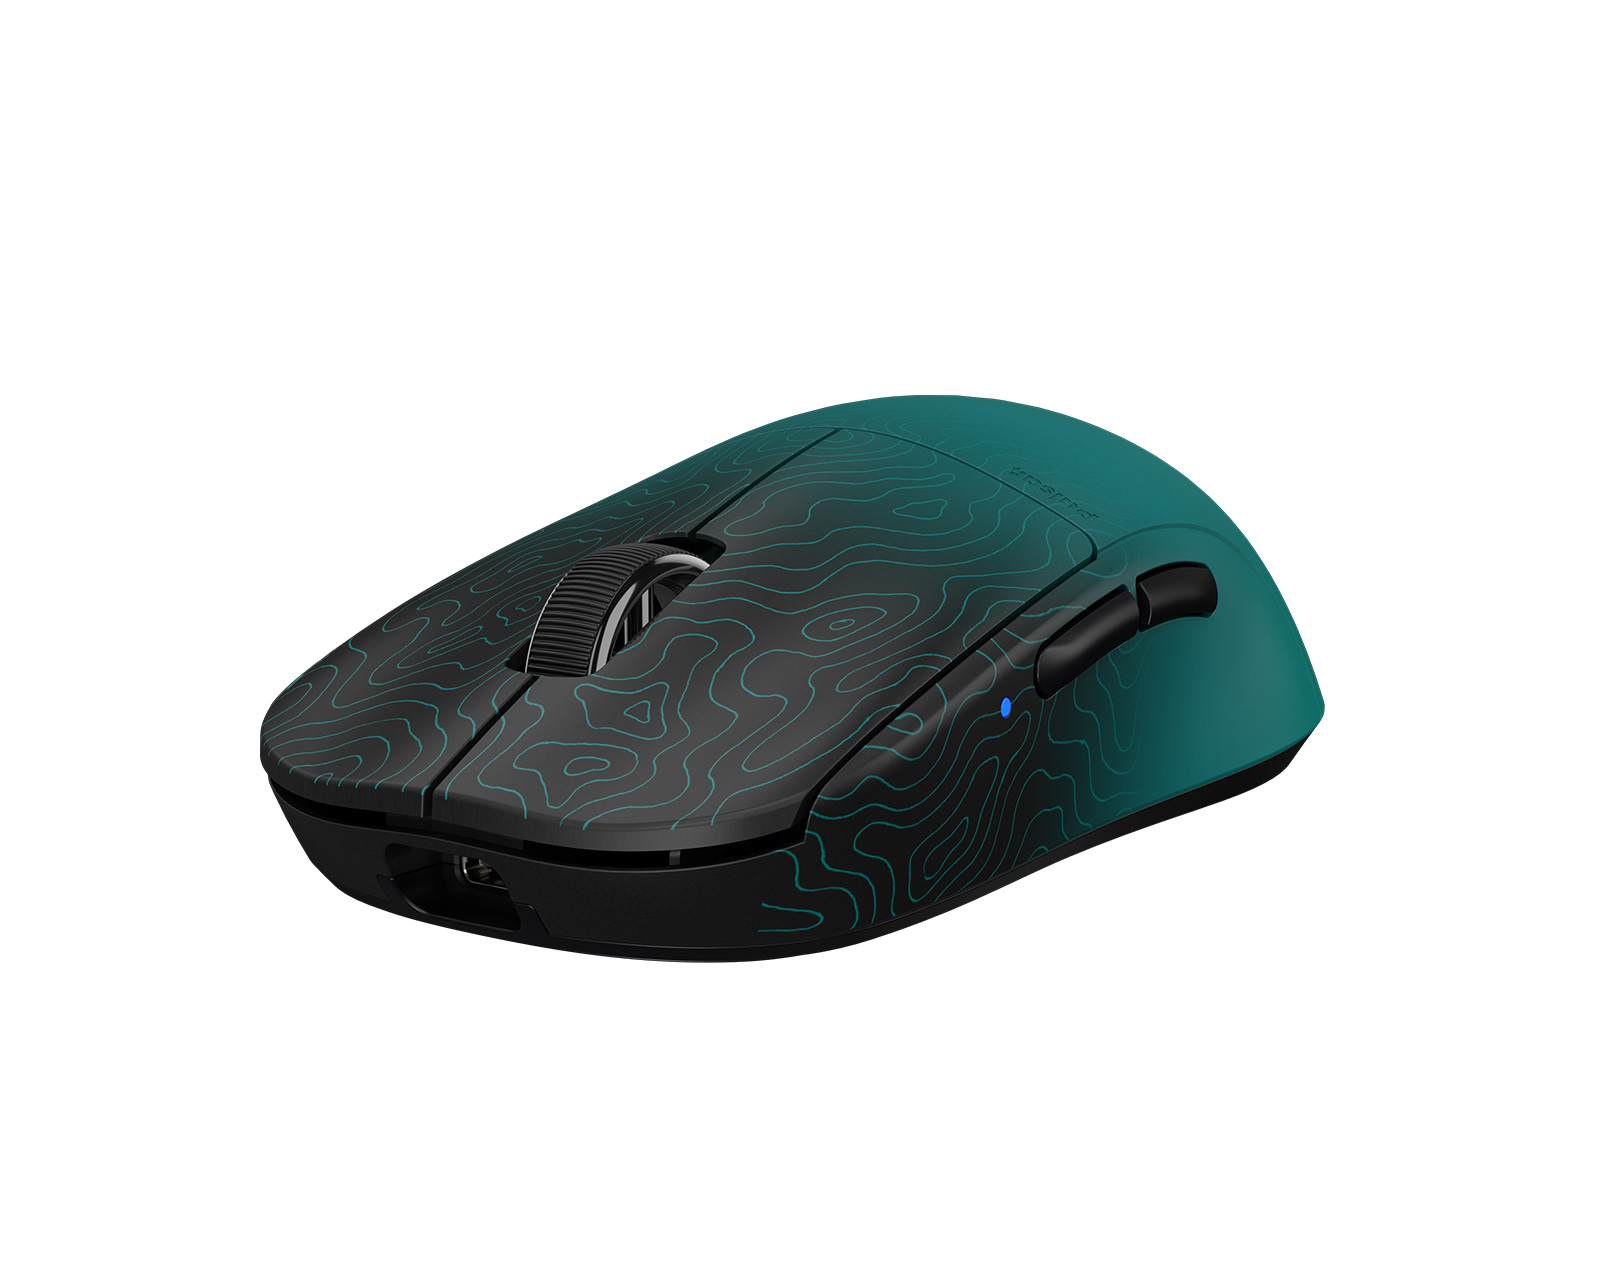 Pulsar X2 Wireless Gaming Mouse - RandomFrankP Limited Edition